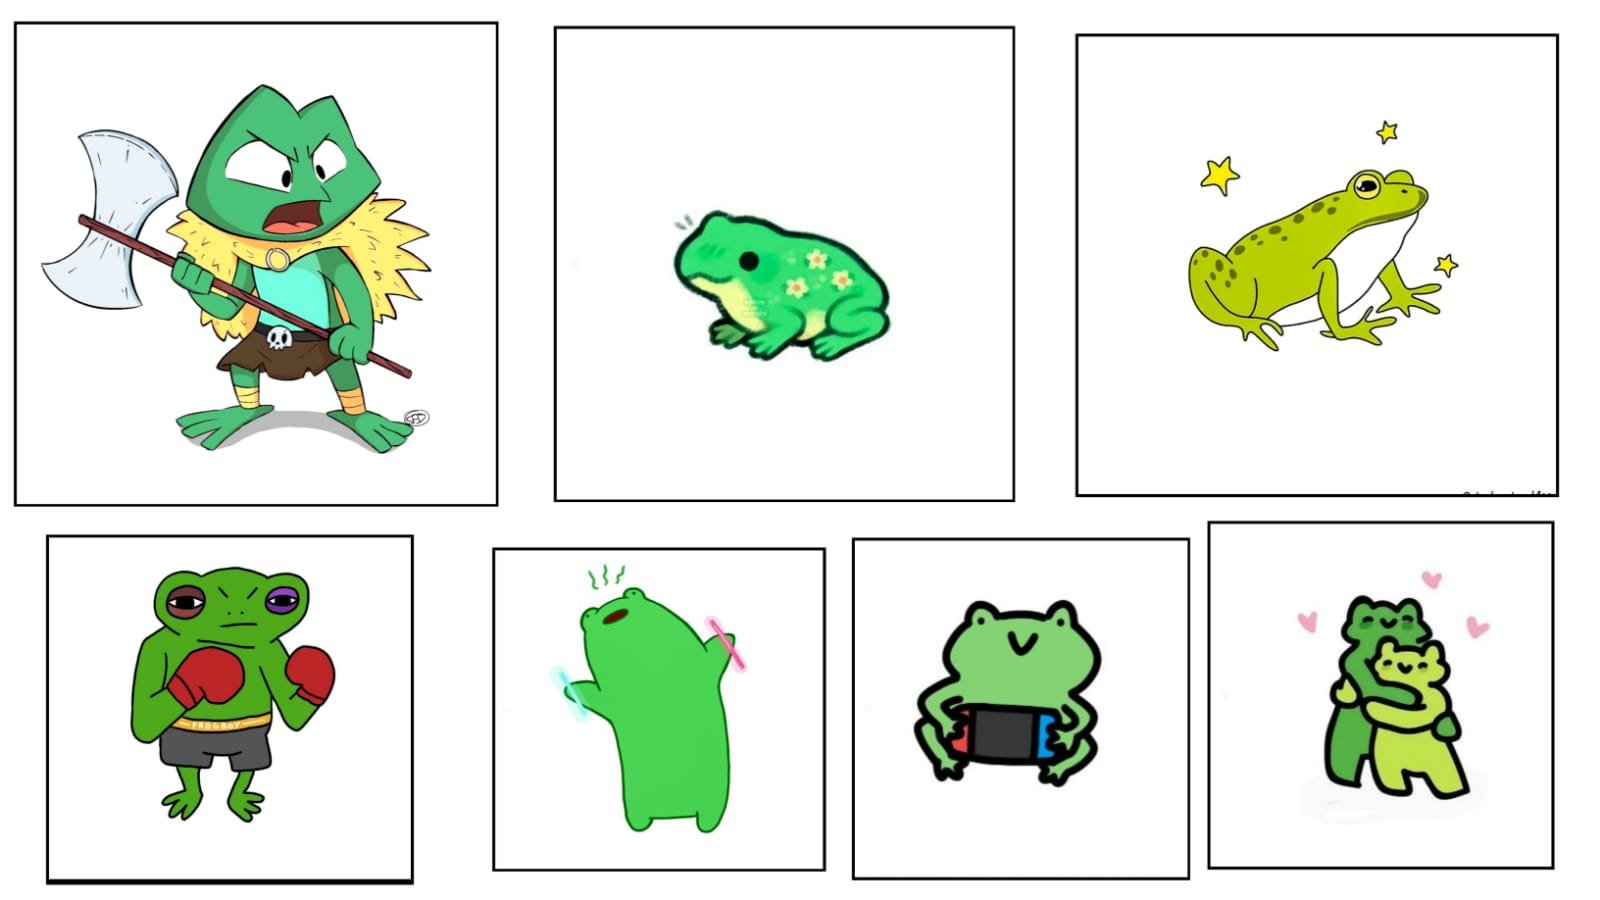 How To Draw A Frog Easy, Step by Step, Drawing Guide, by HungerGames1 -  DragoArt